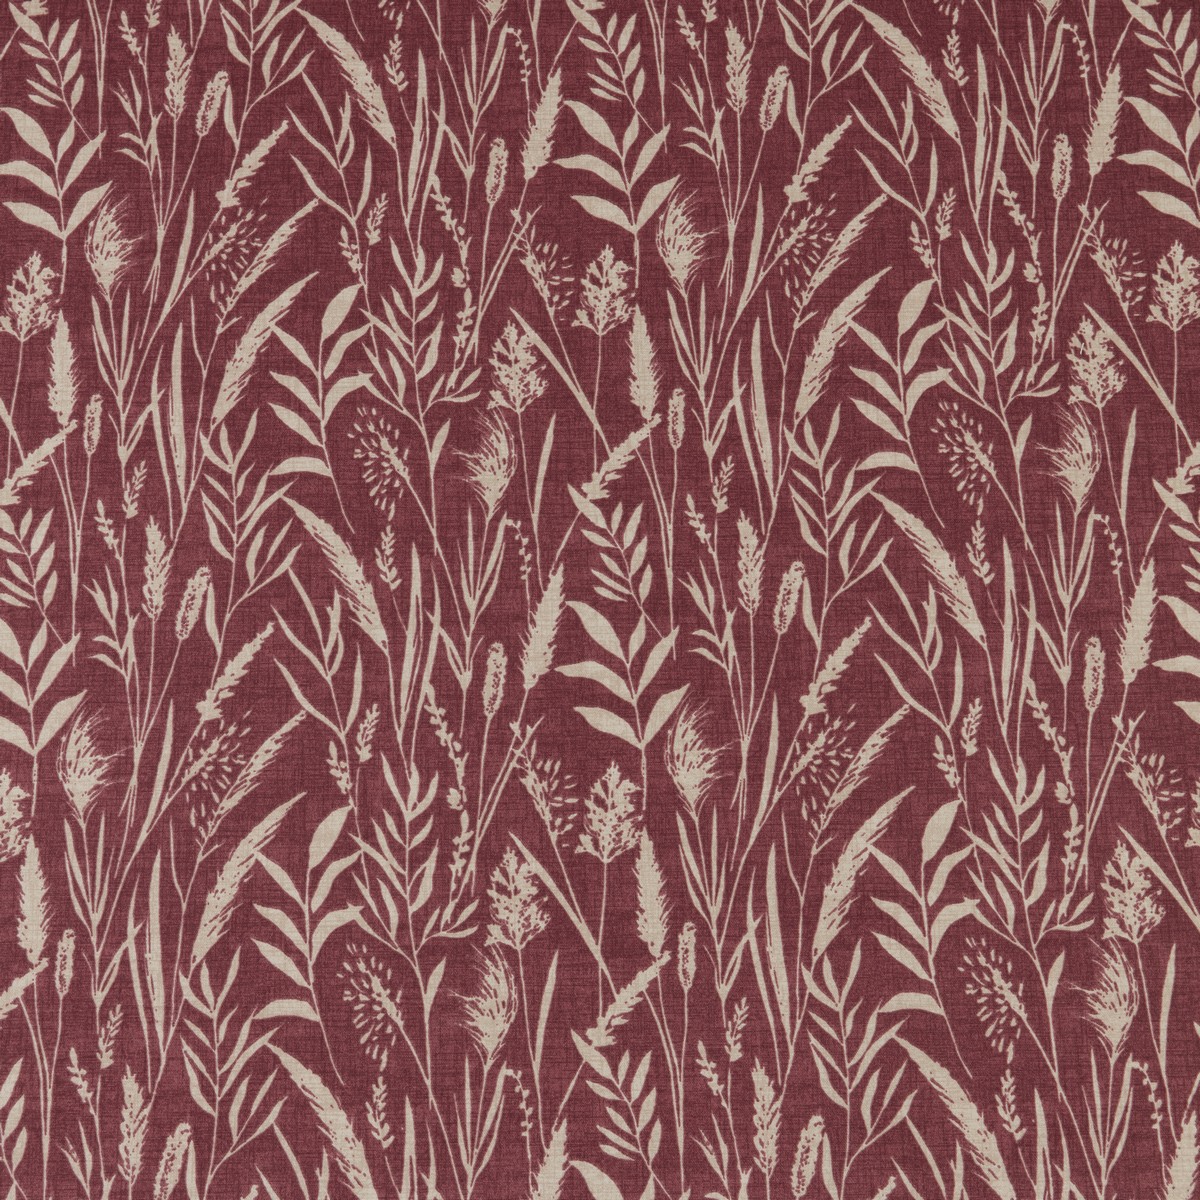 Wild Grasses Rosewood Fabric by iLiv